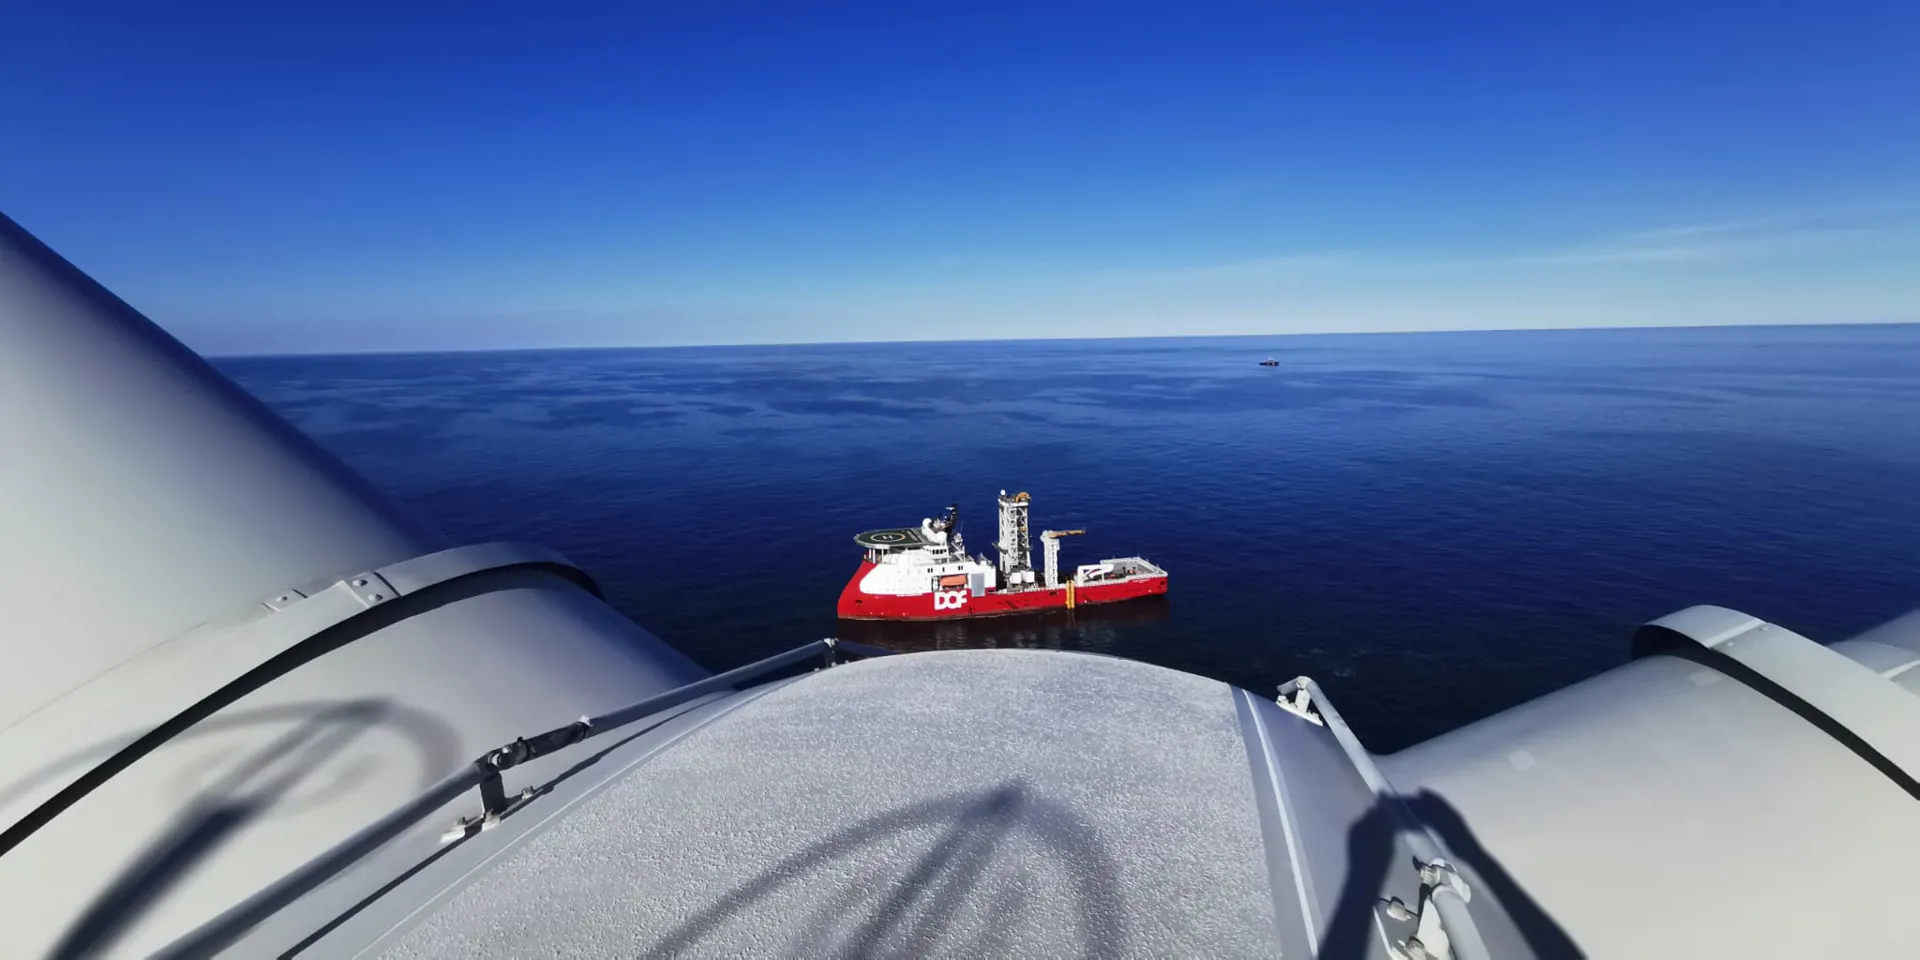 View of OSV from the top of a wind turbine